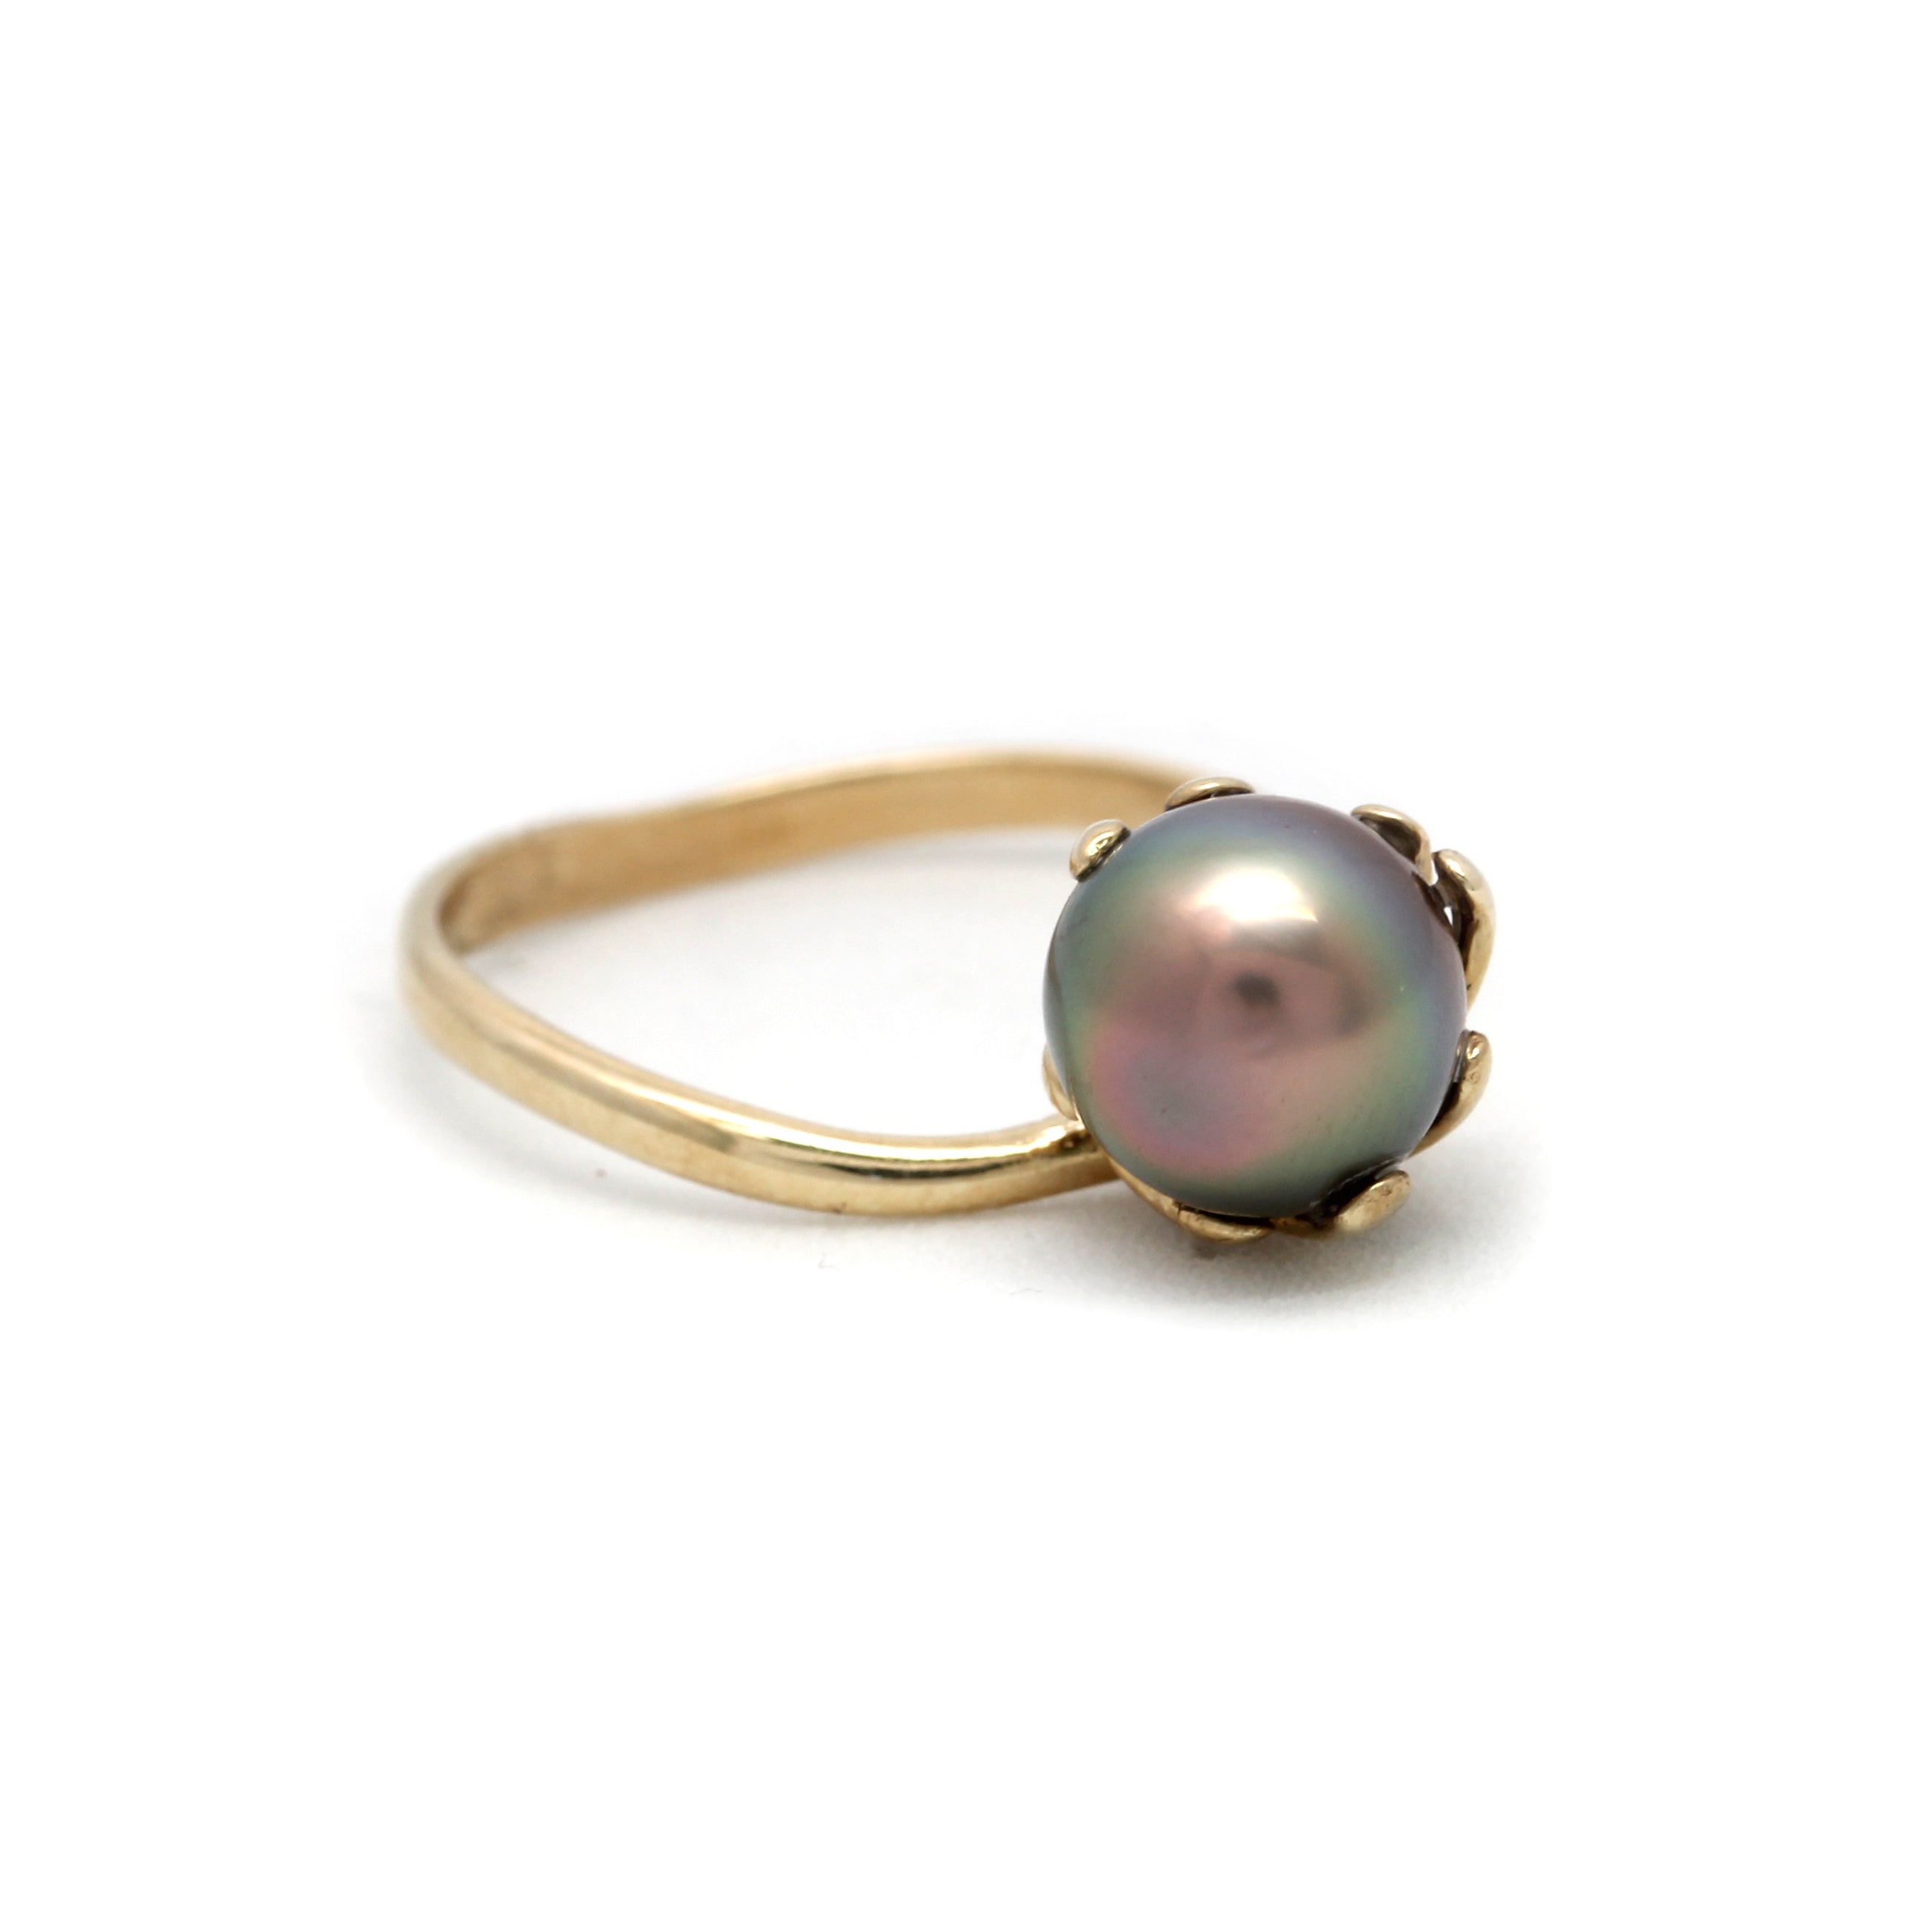 14K Yellow Gold Ring with a Cortez Pearl